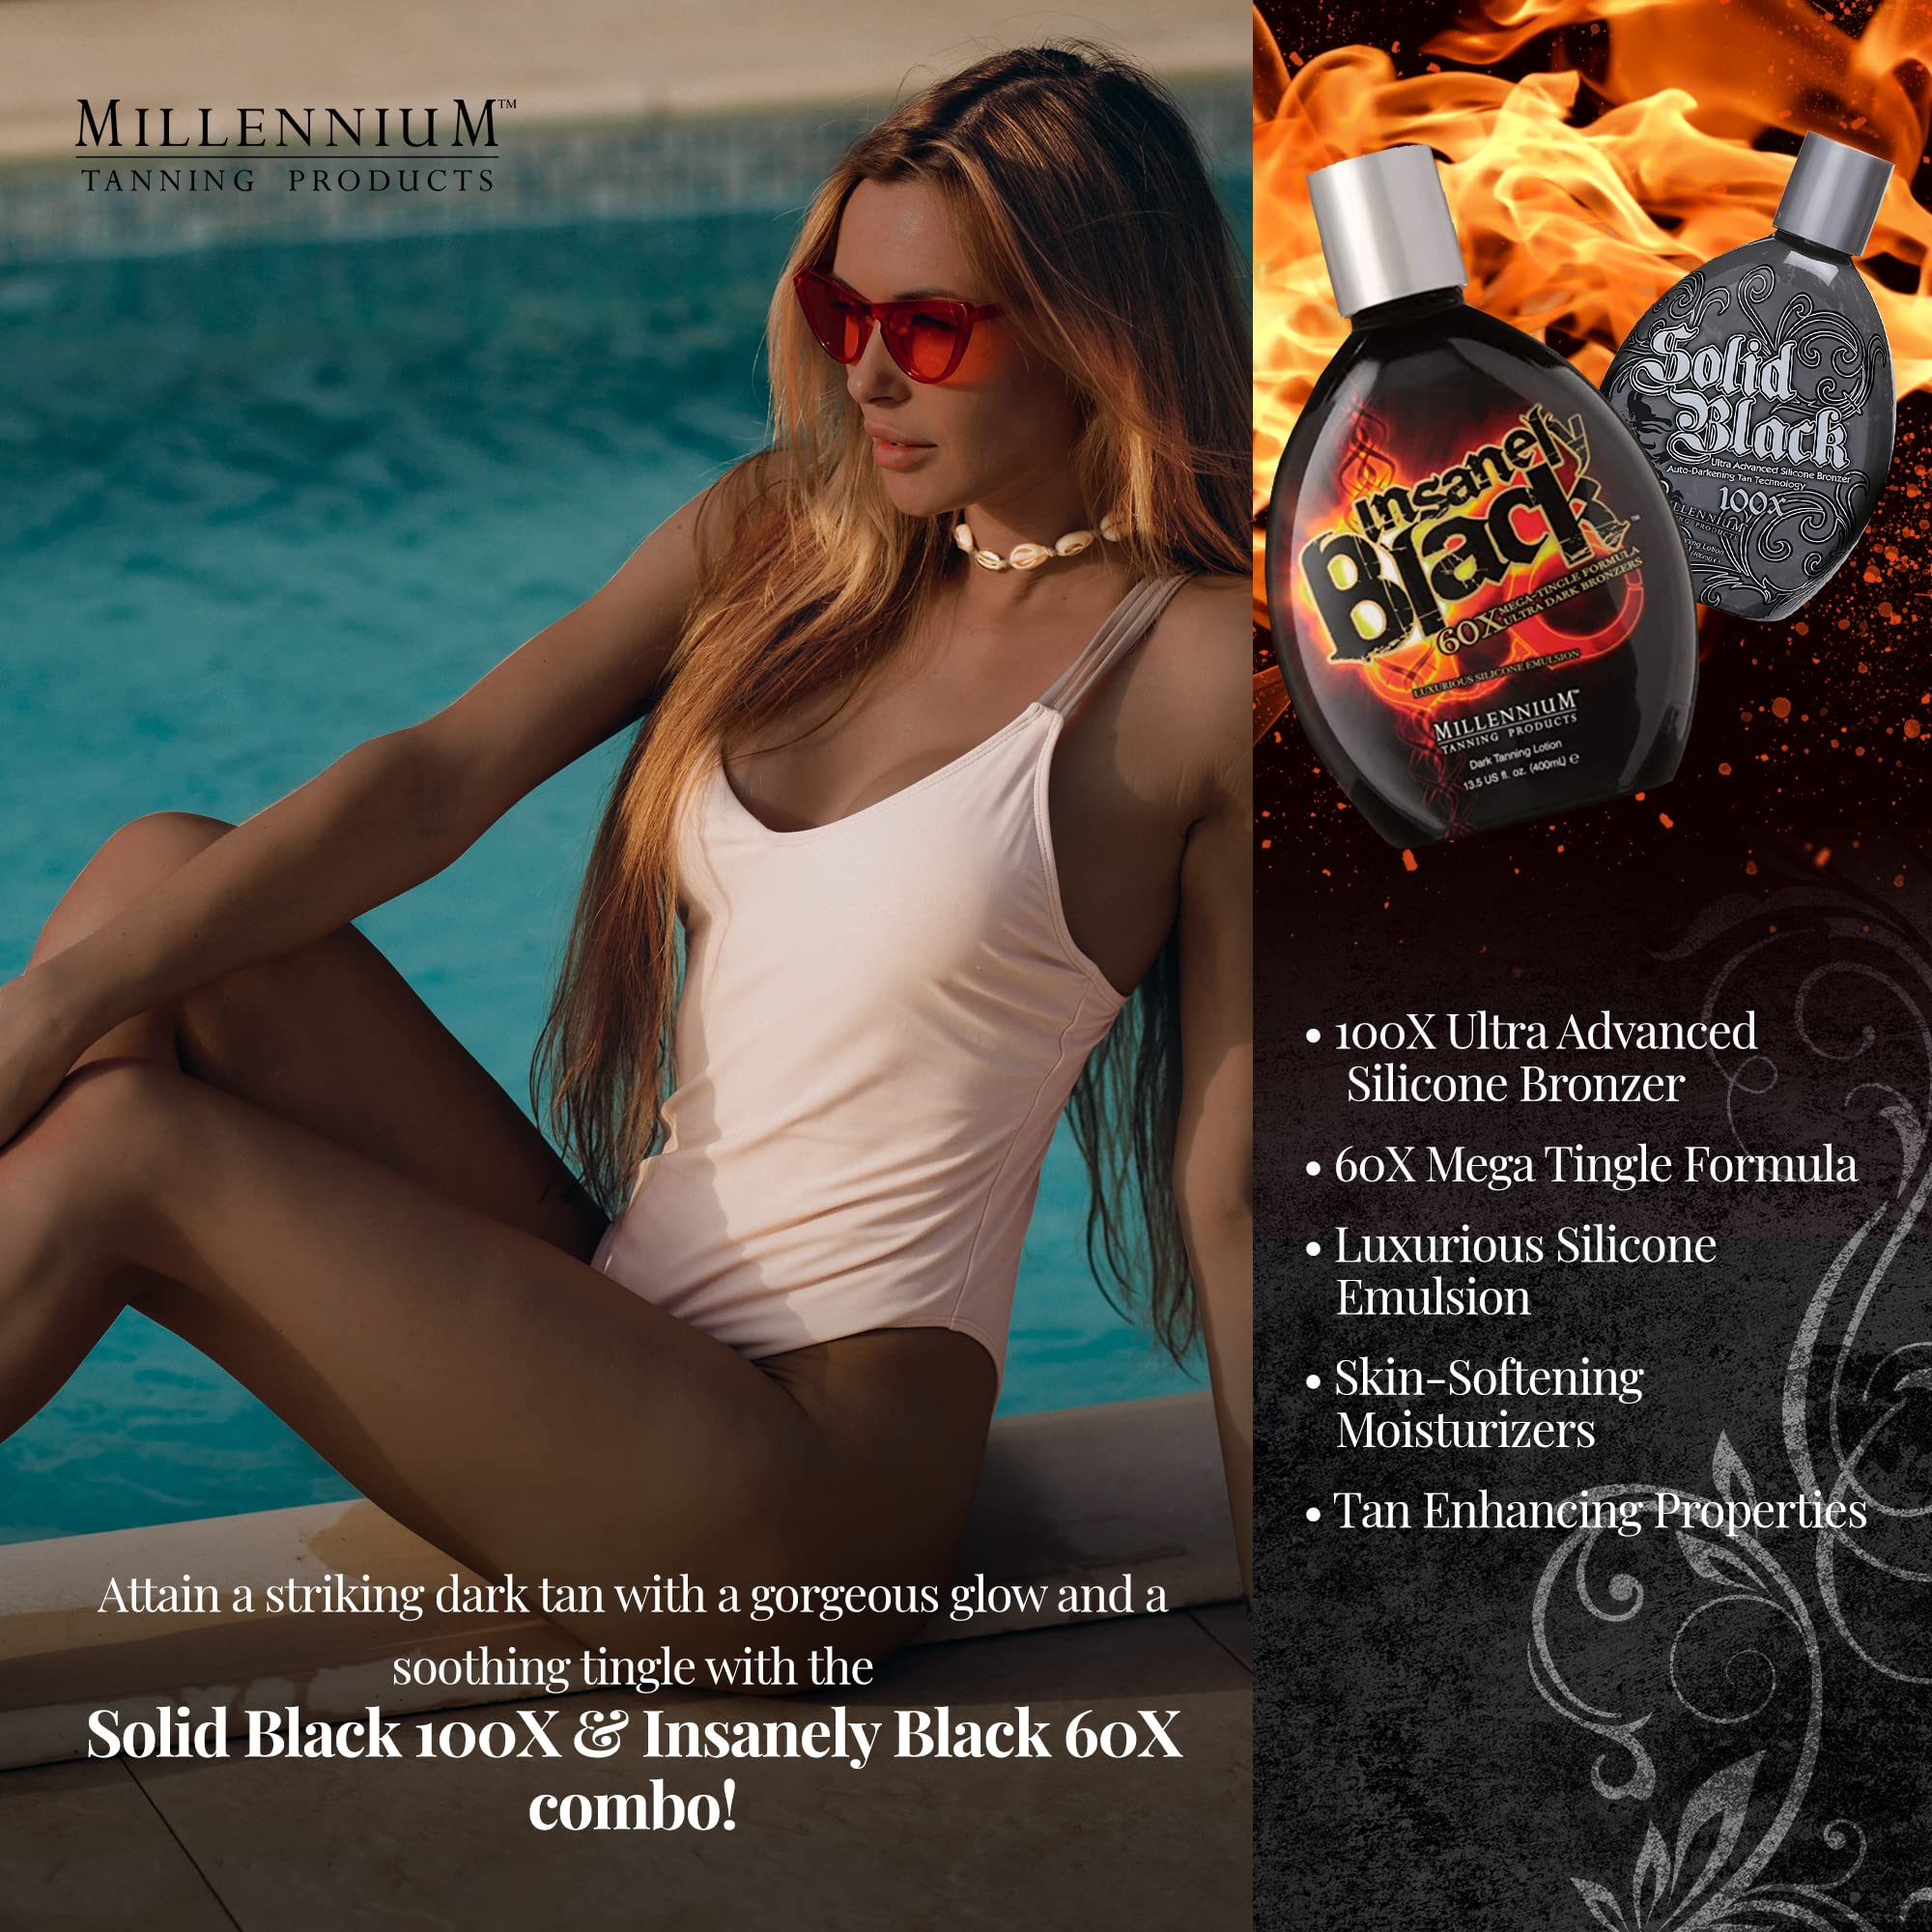 Millennium Tanning Products, Solid Black 100x (13.5 oz) and Insanely Black 60x (13.5 oz)